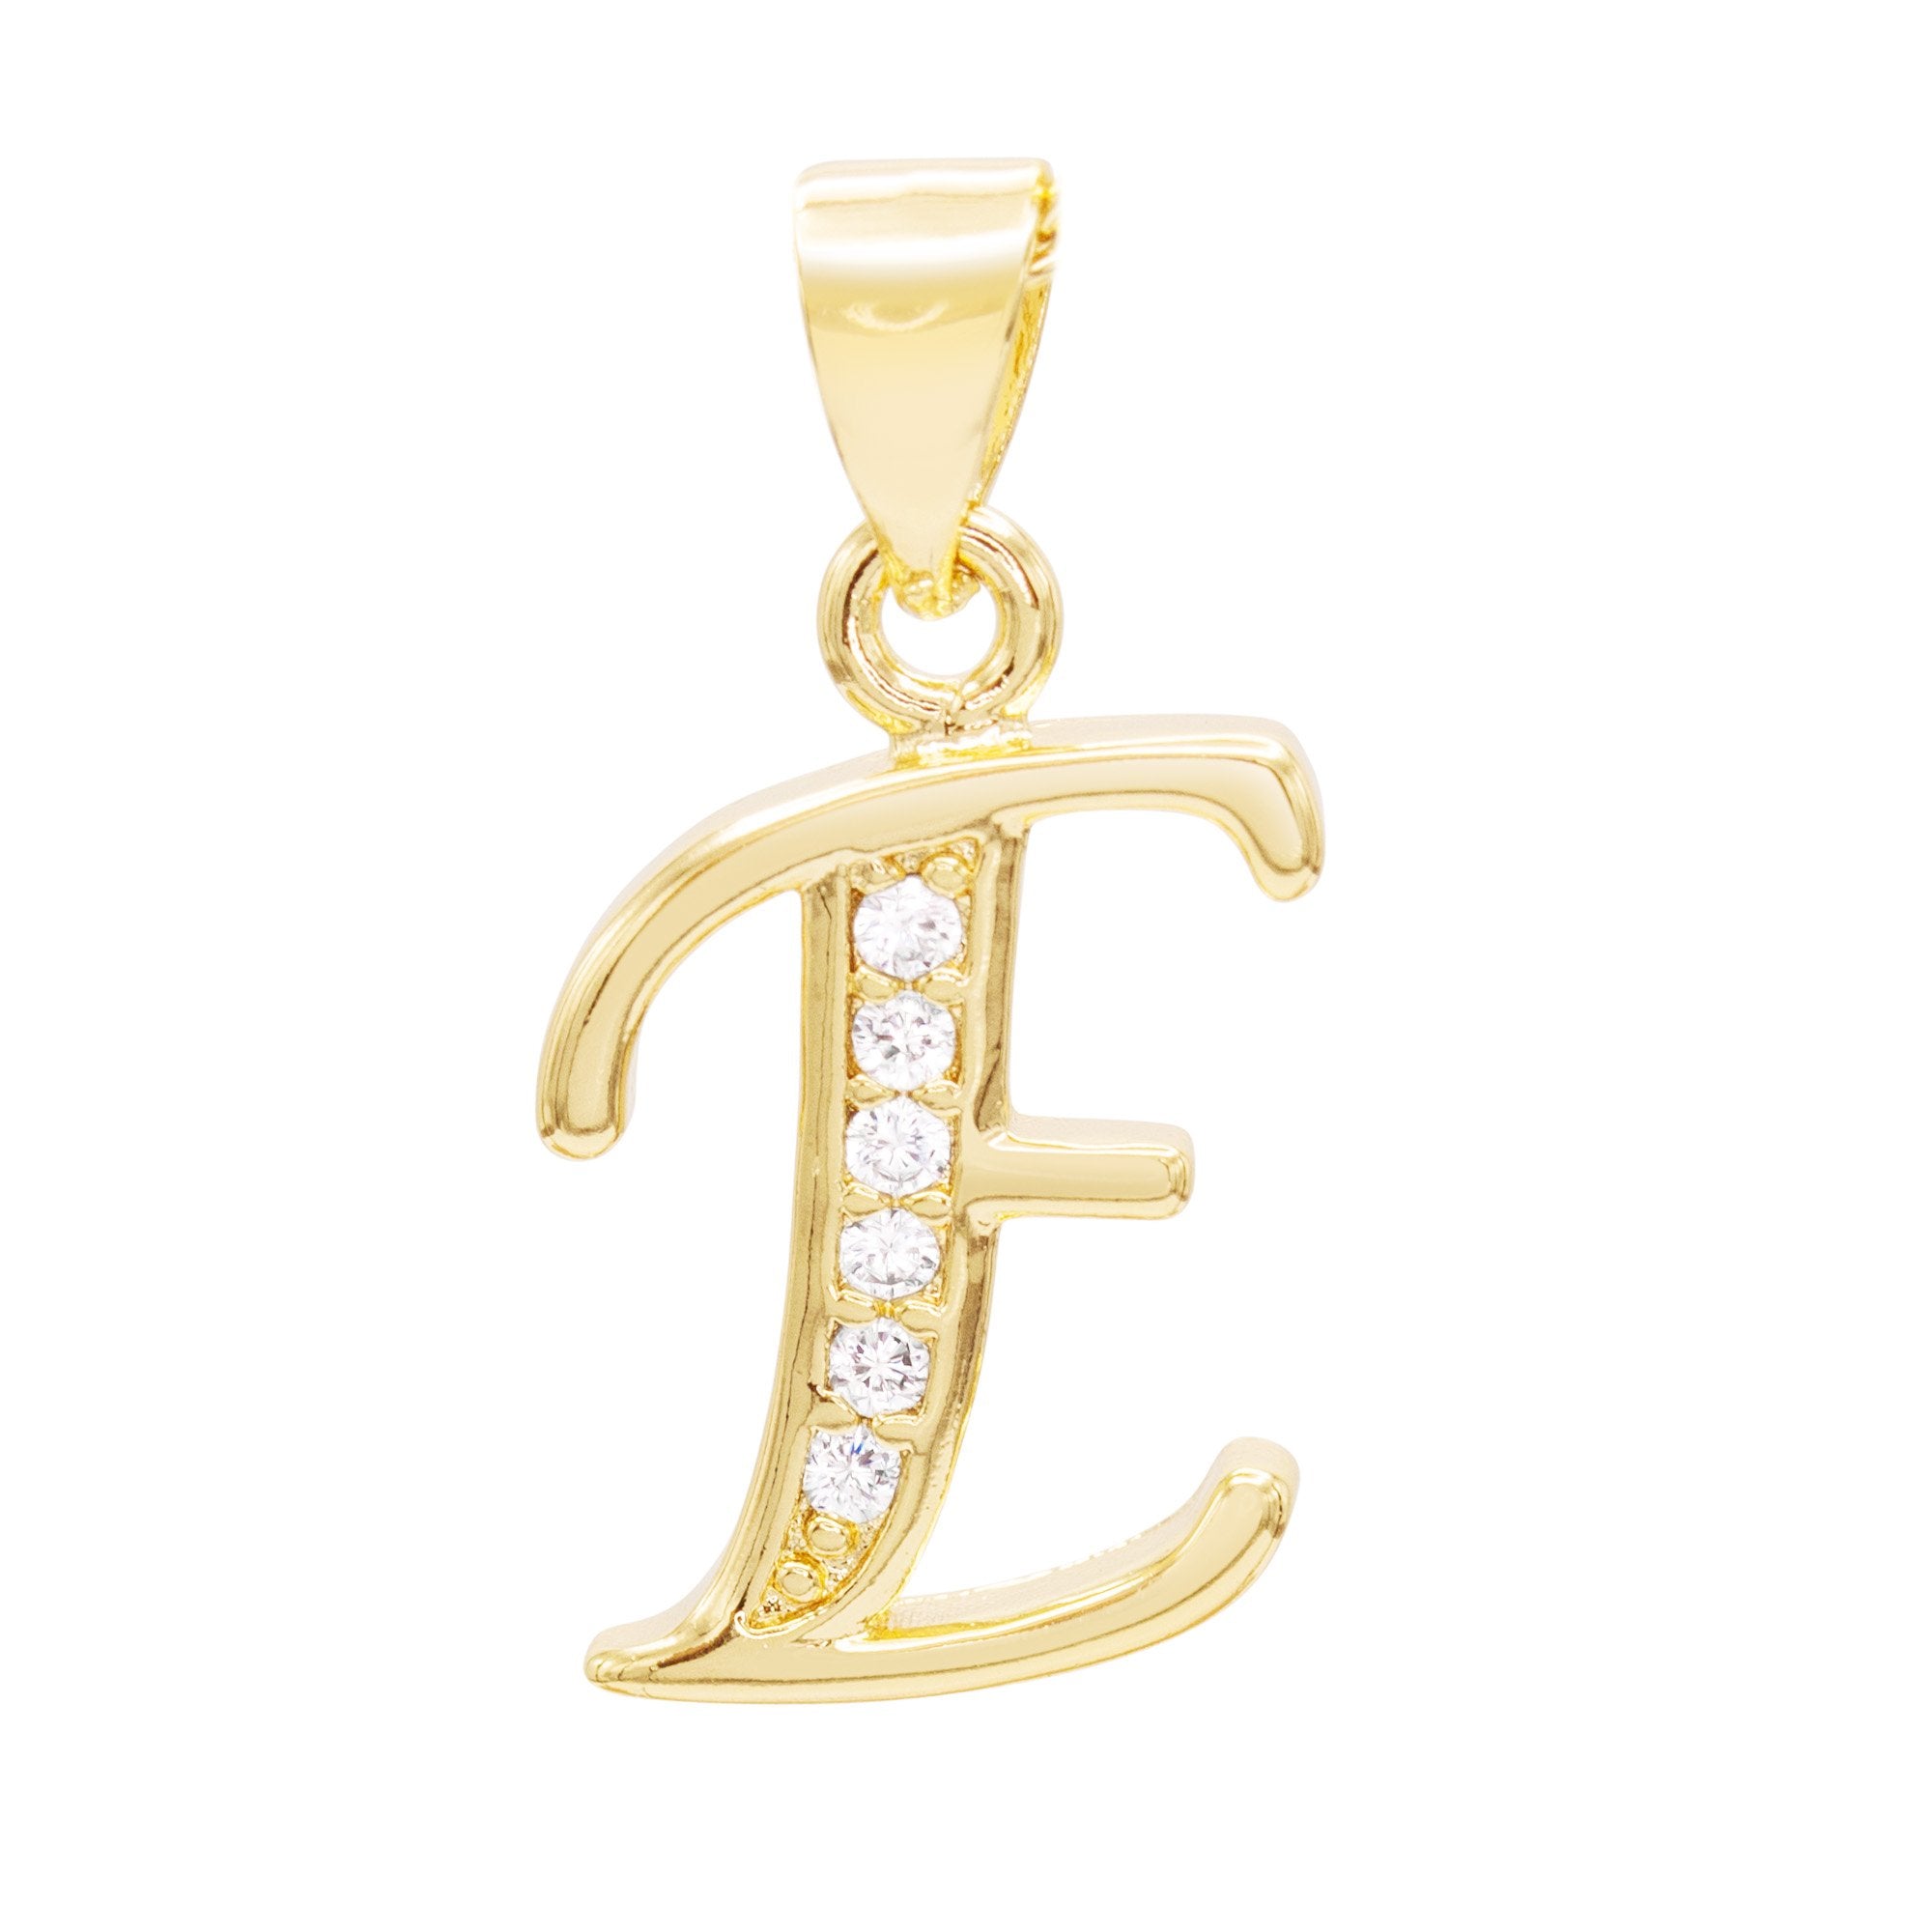 Small Gold Alphabet Letter Charms With CZ Rhinestones 8-9mm 